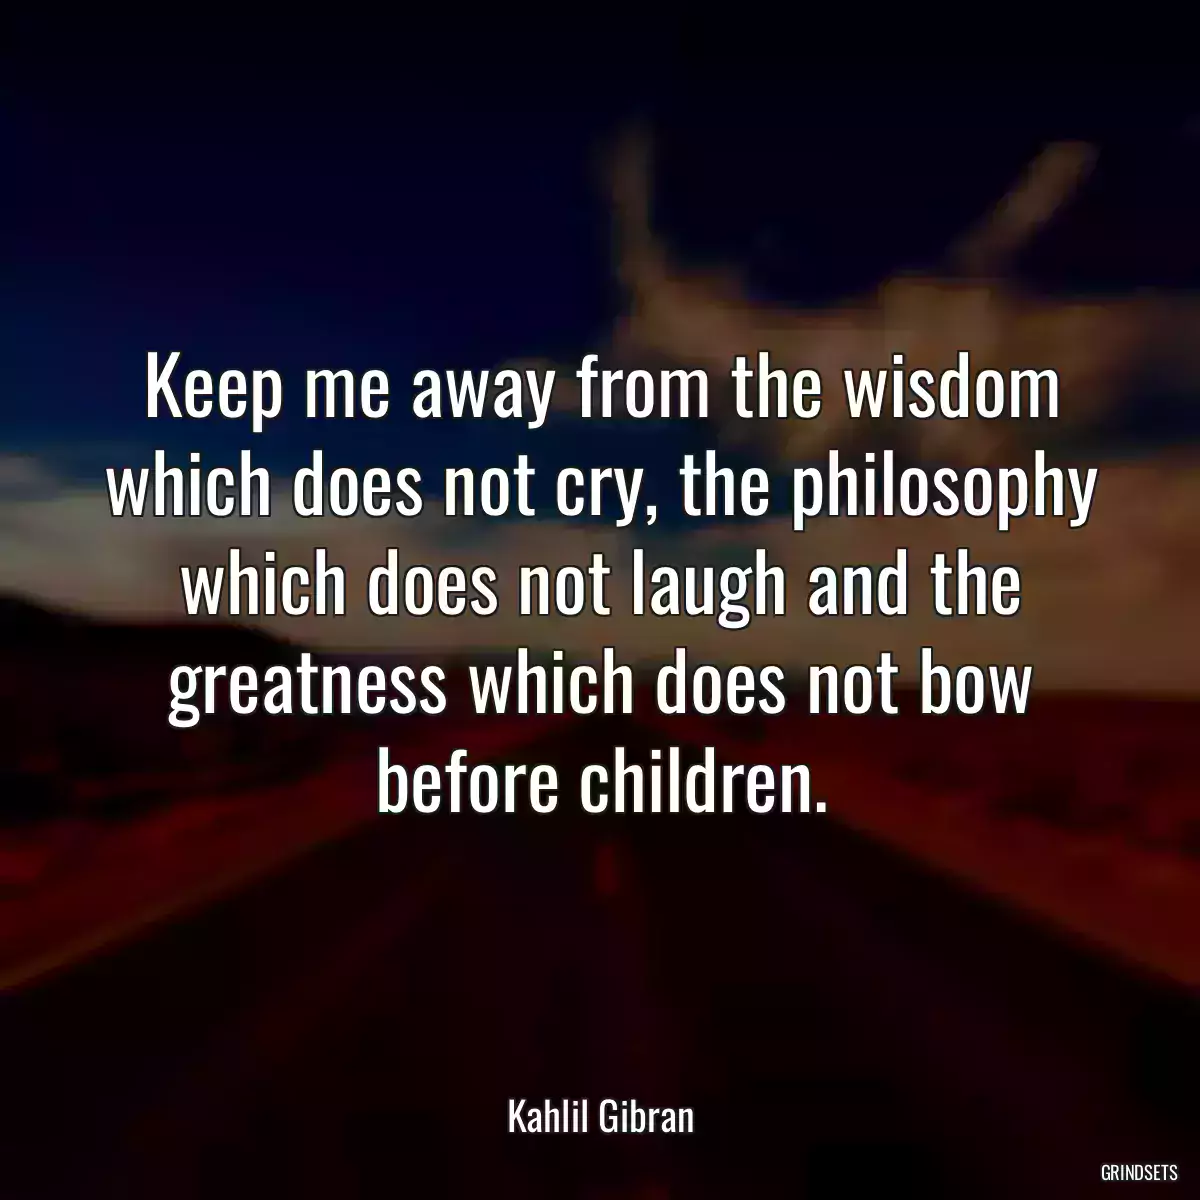 Keep me away from the wisdom which does not cry, the philosophy which does not laugh and the greatness which does not bow before children.